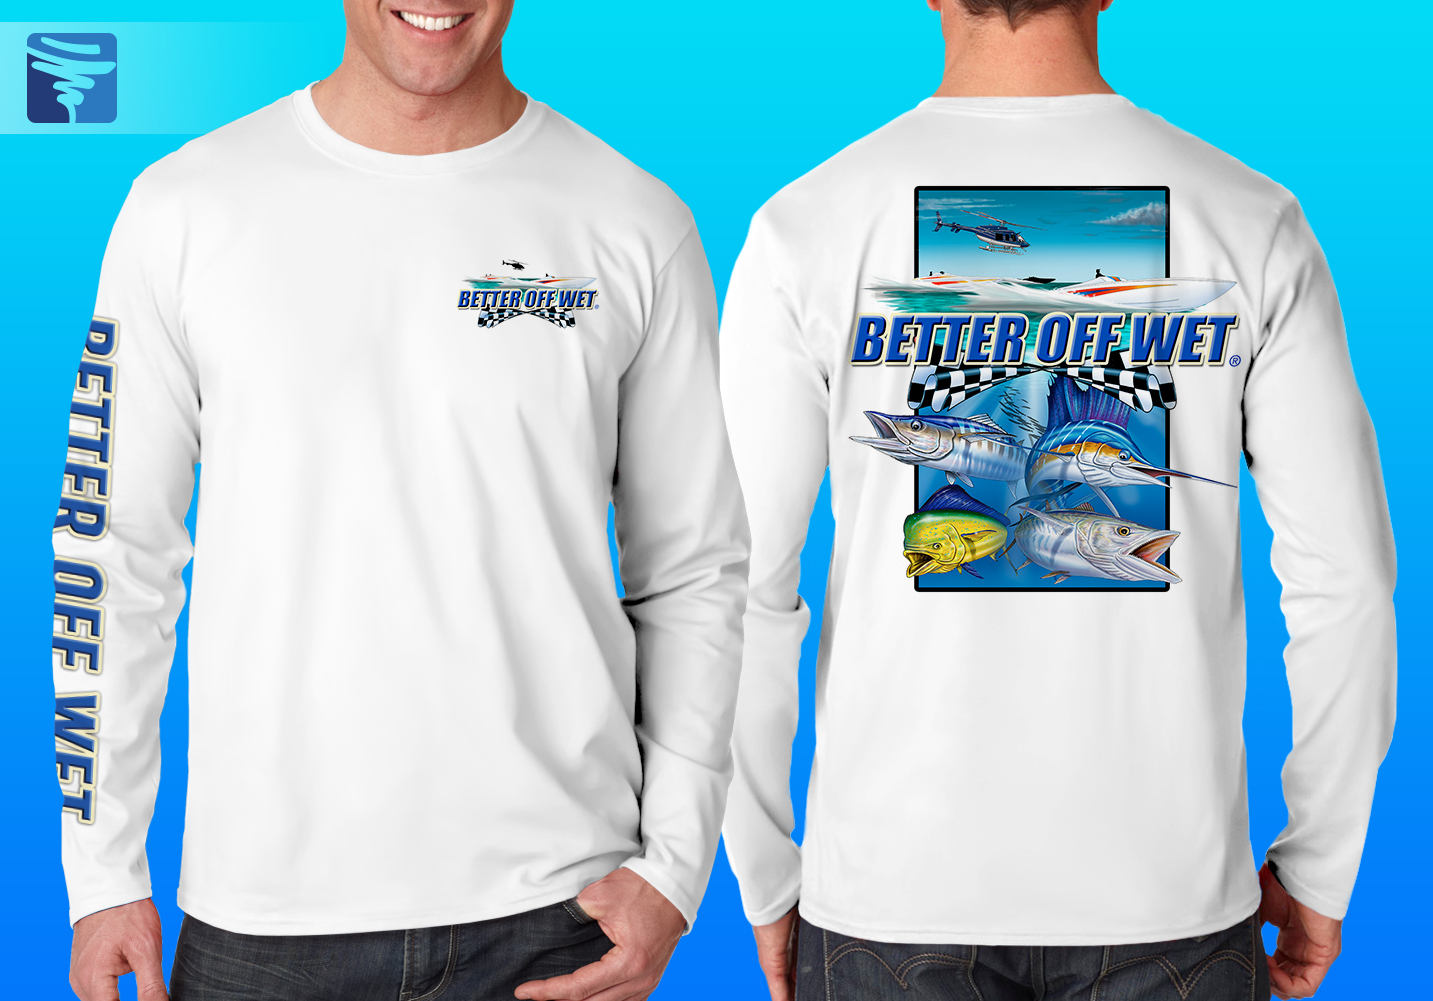 Fish Race Performance Shirt - Better Off Wet Water Lifestyle Magazine,  Charters, and Apparel